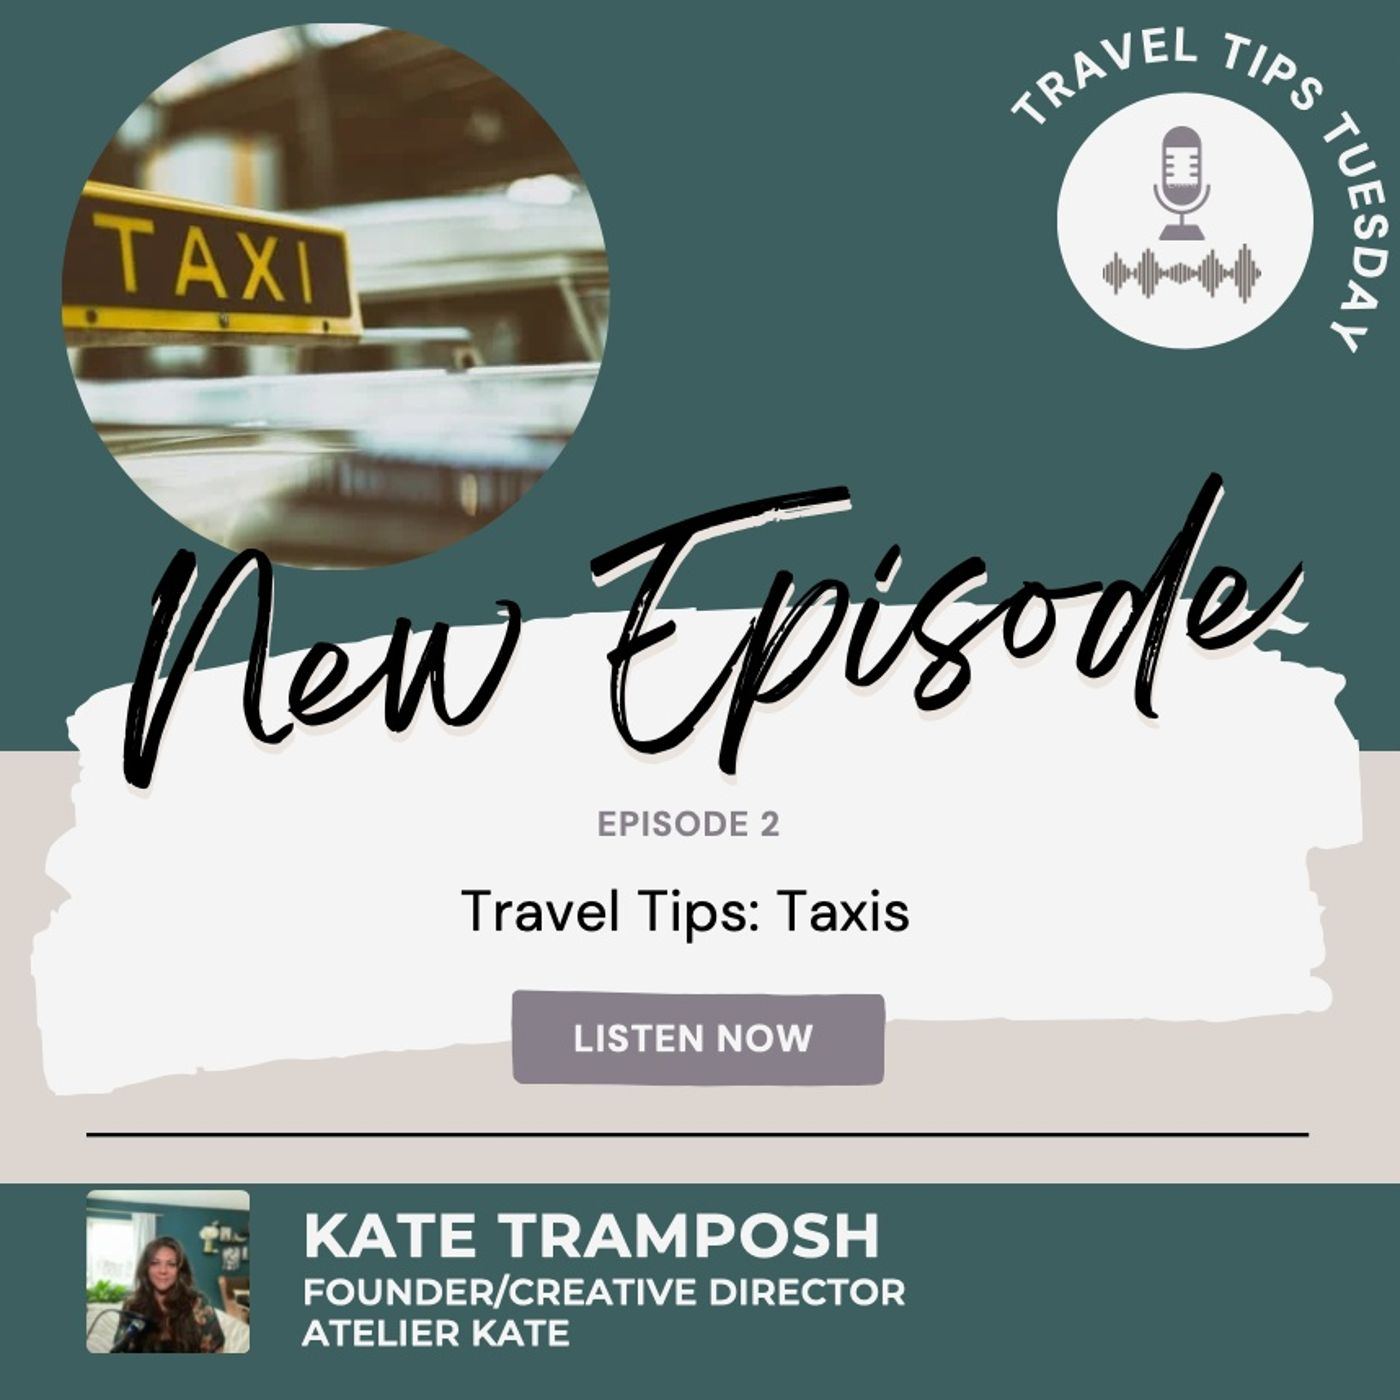 Travel Tip: Taxis